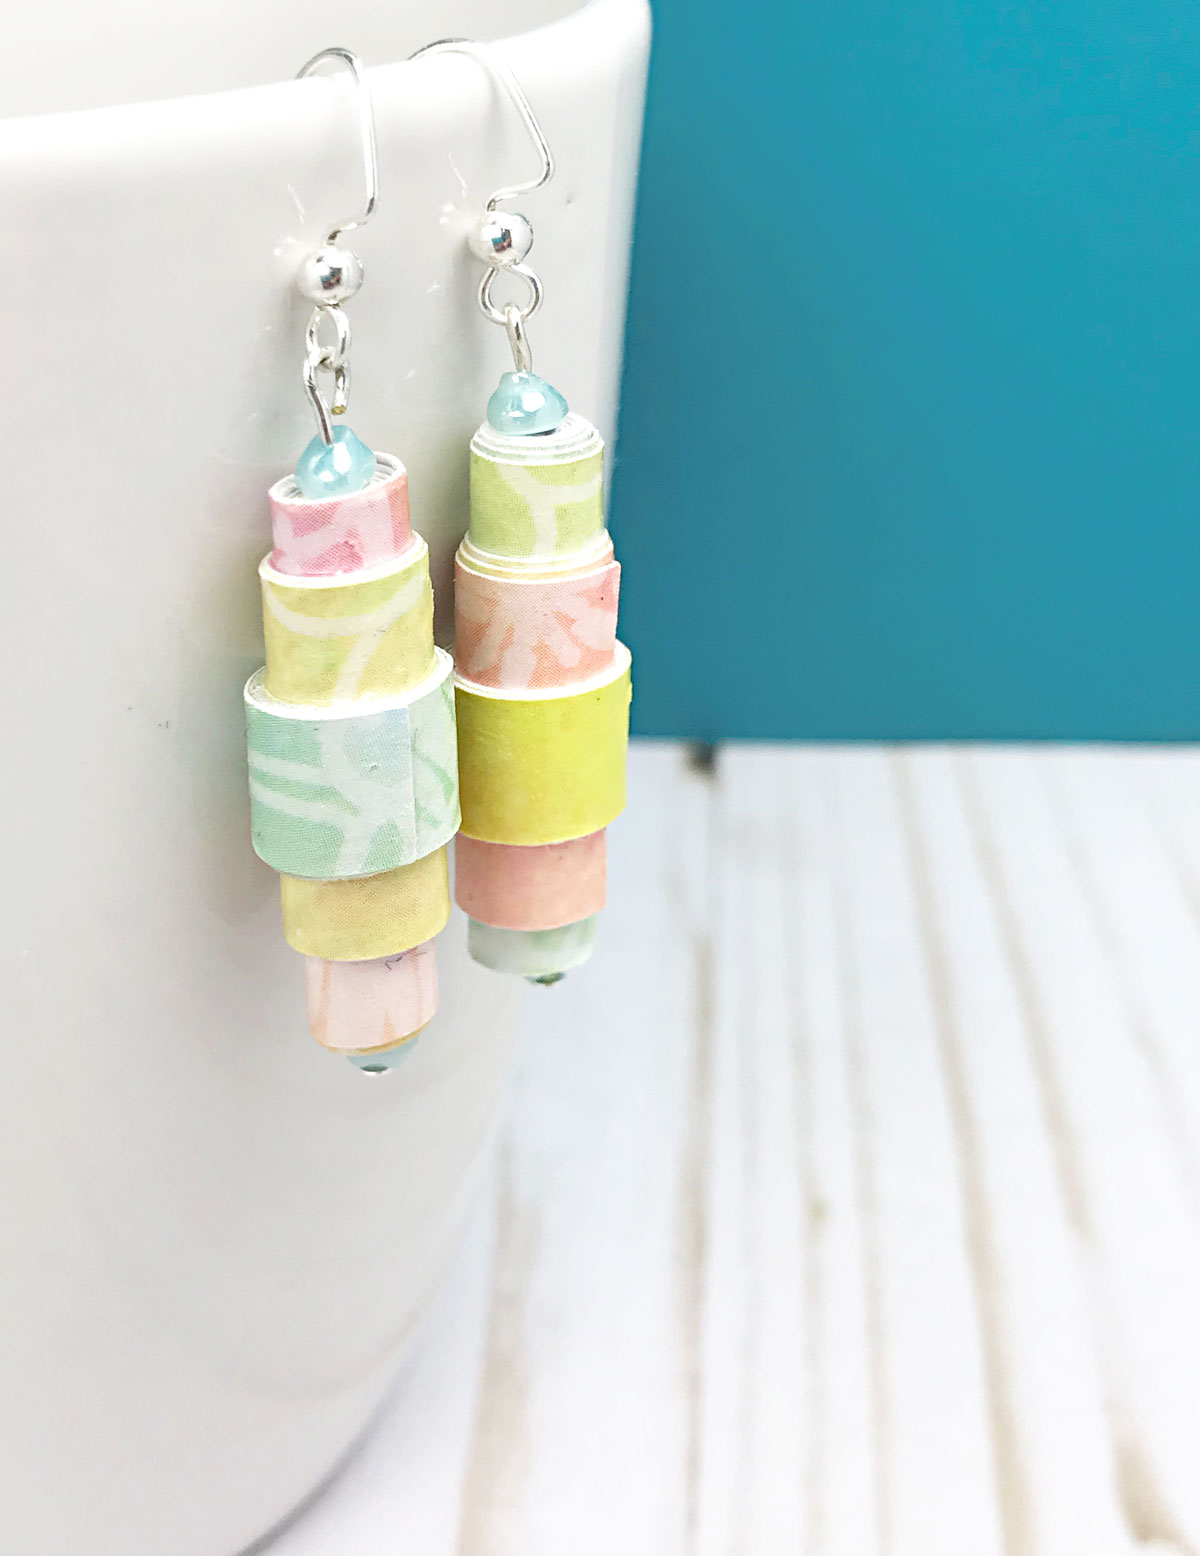 Crafting The Day Away: DIY Paper Bead Roller and Bead Hole Maker